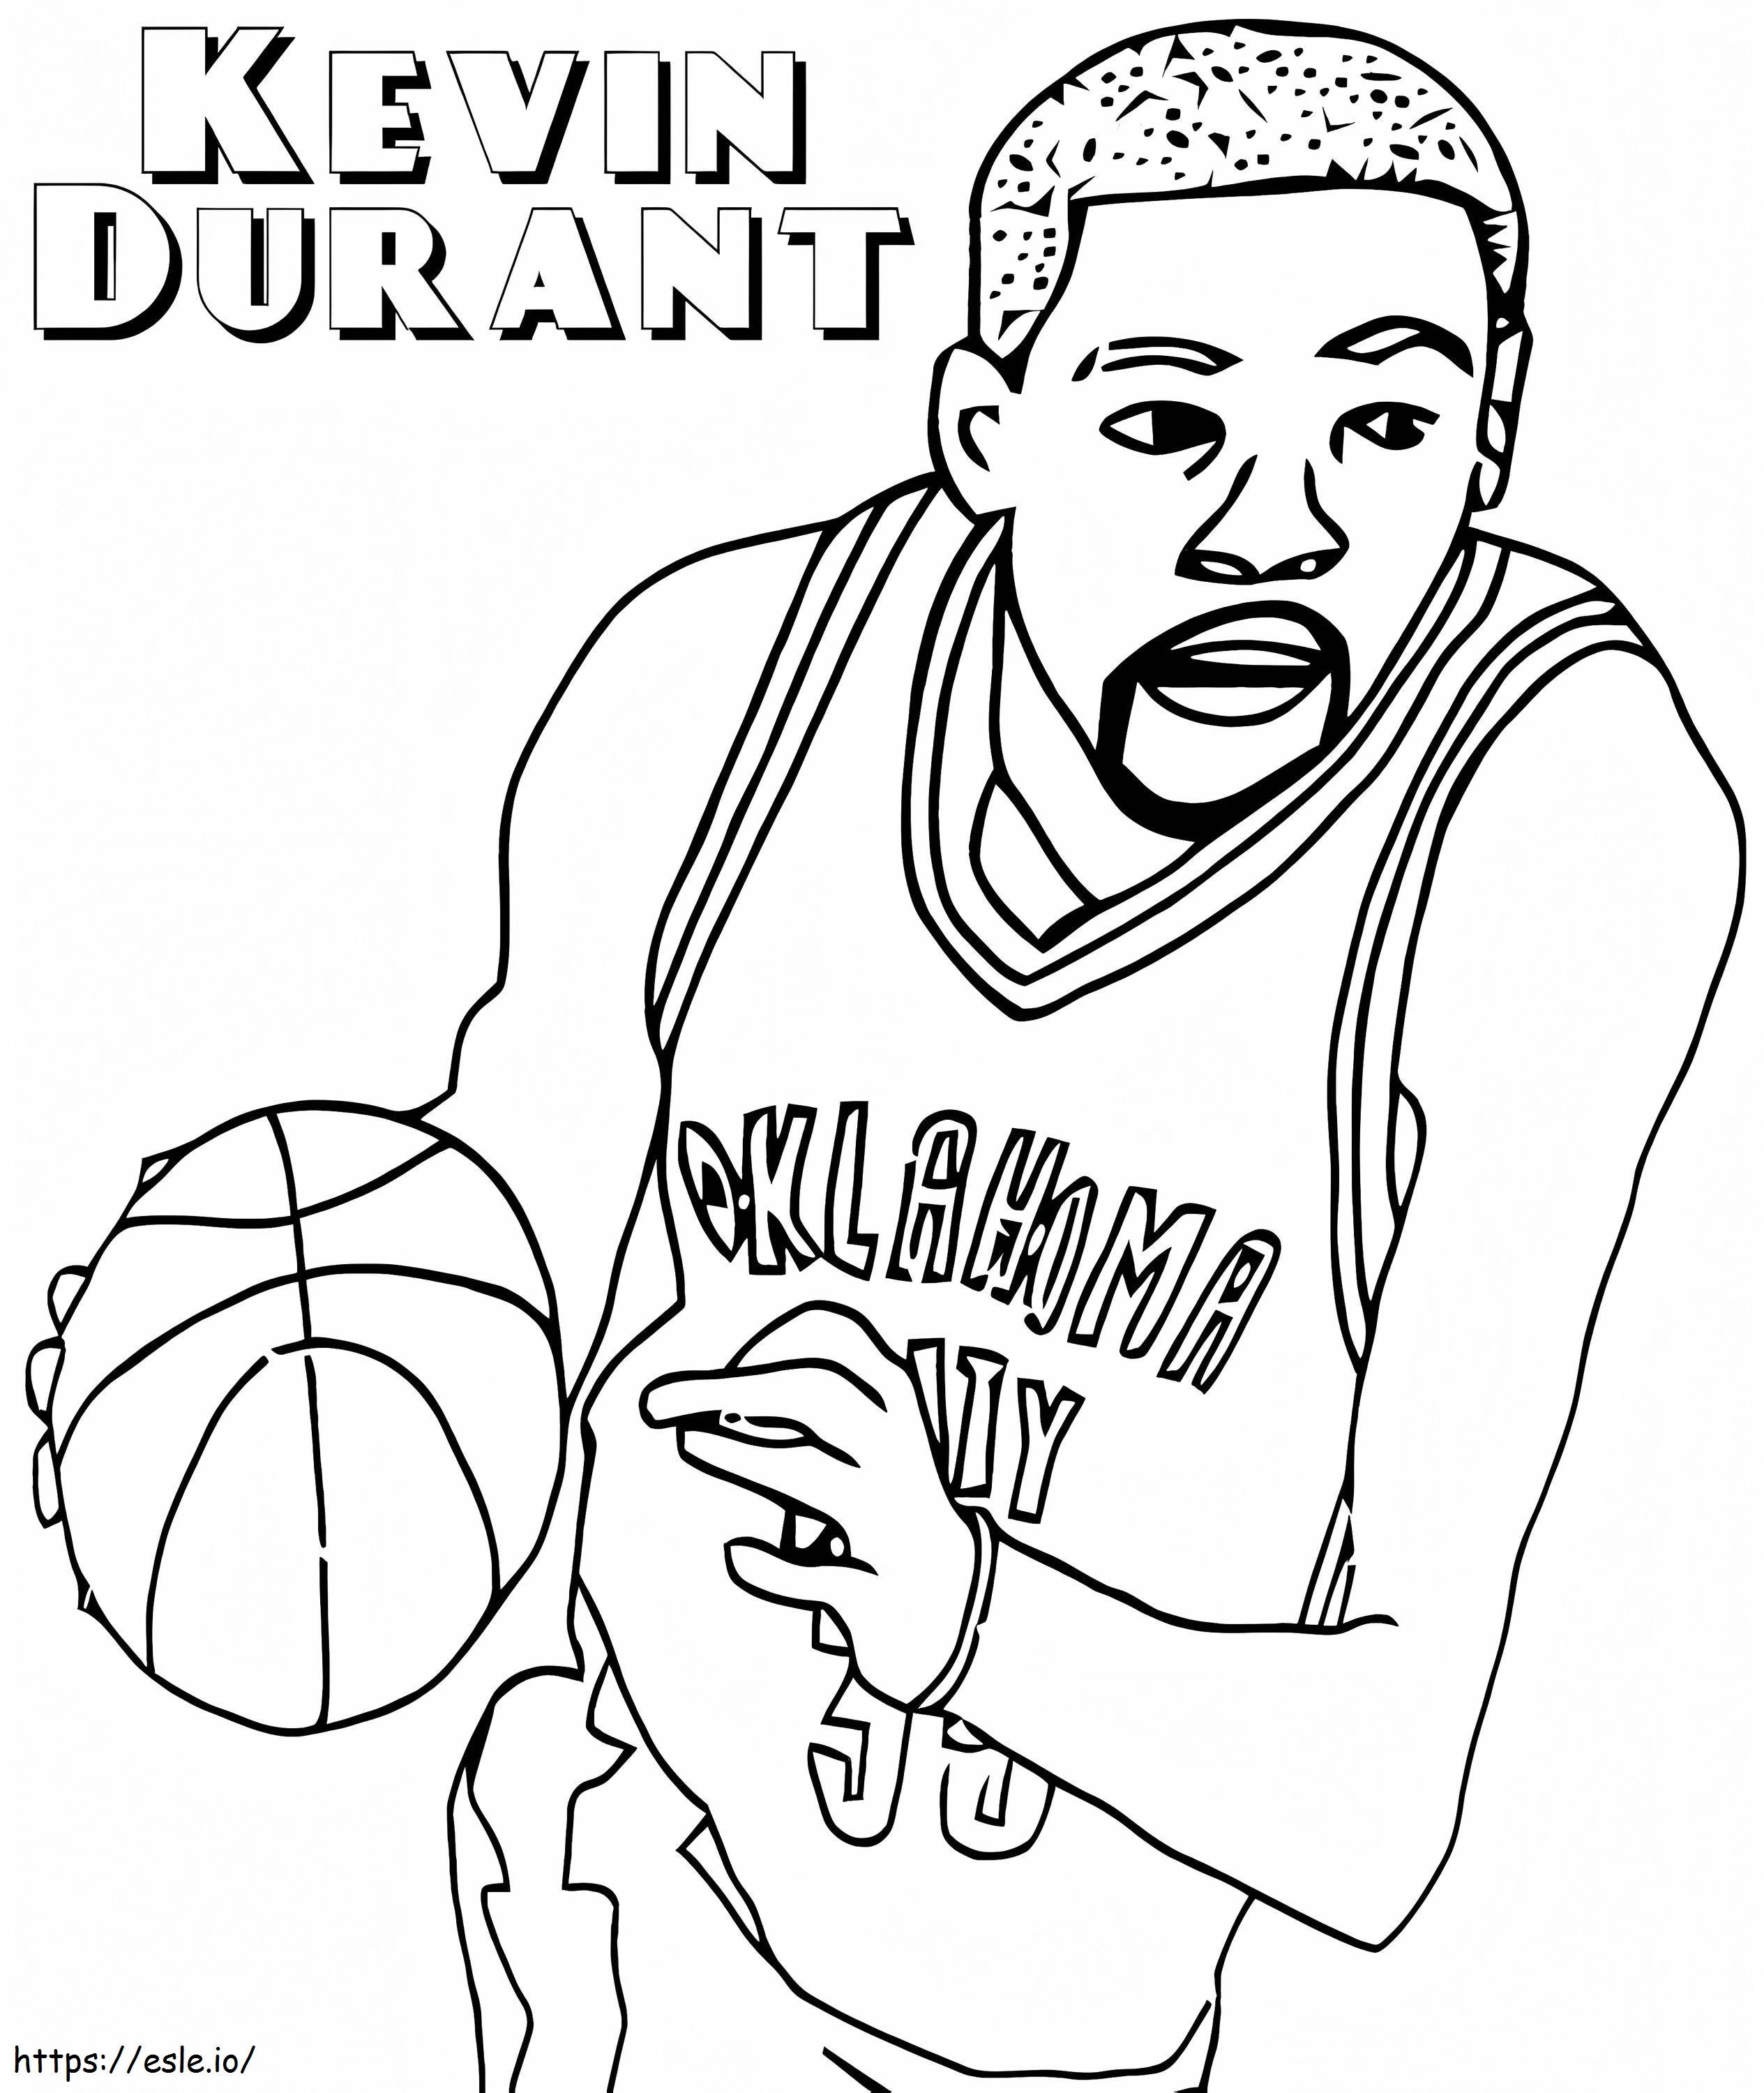 Free Kevin Durant Coloring Page